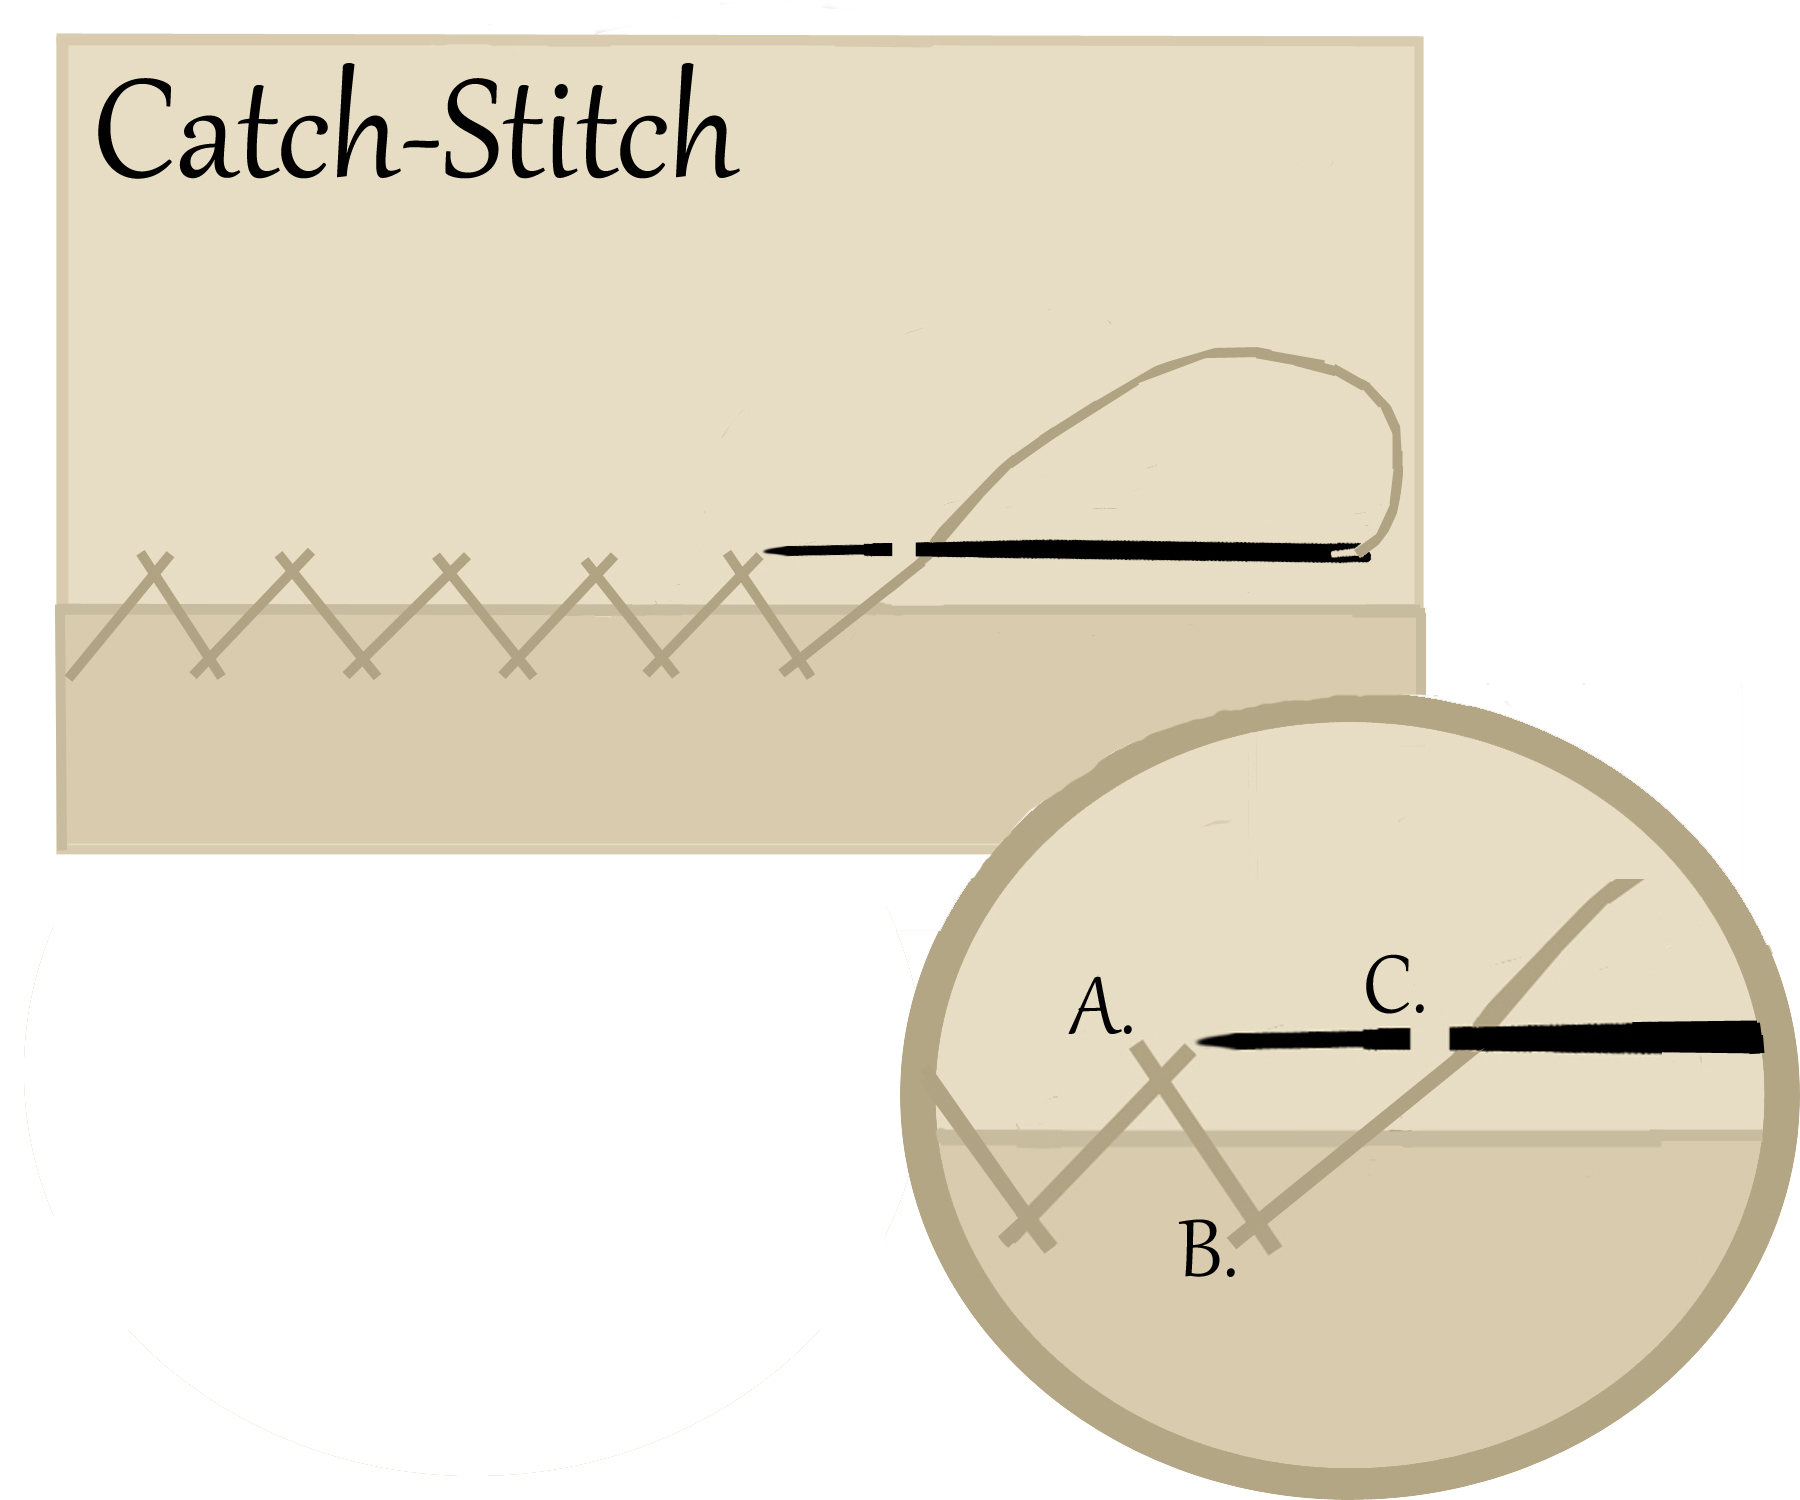 How to Sew by Hand: Seven Basic Stitches  Sewing basics, Hand stitching  techniques, Stitching techniques